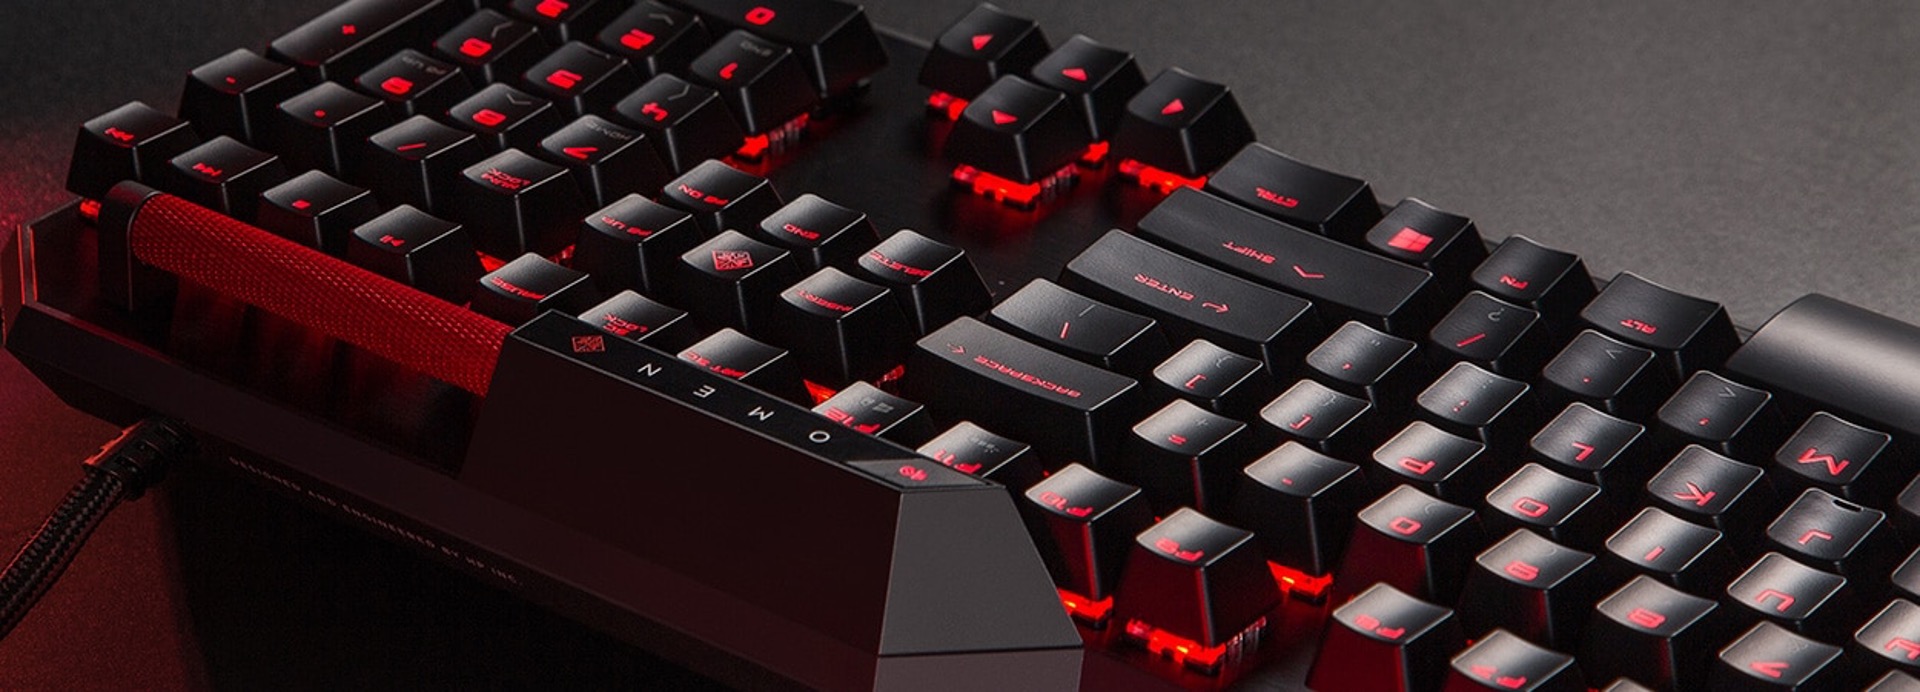 Where To Resell A Gaming Keyboard